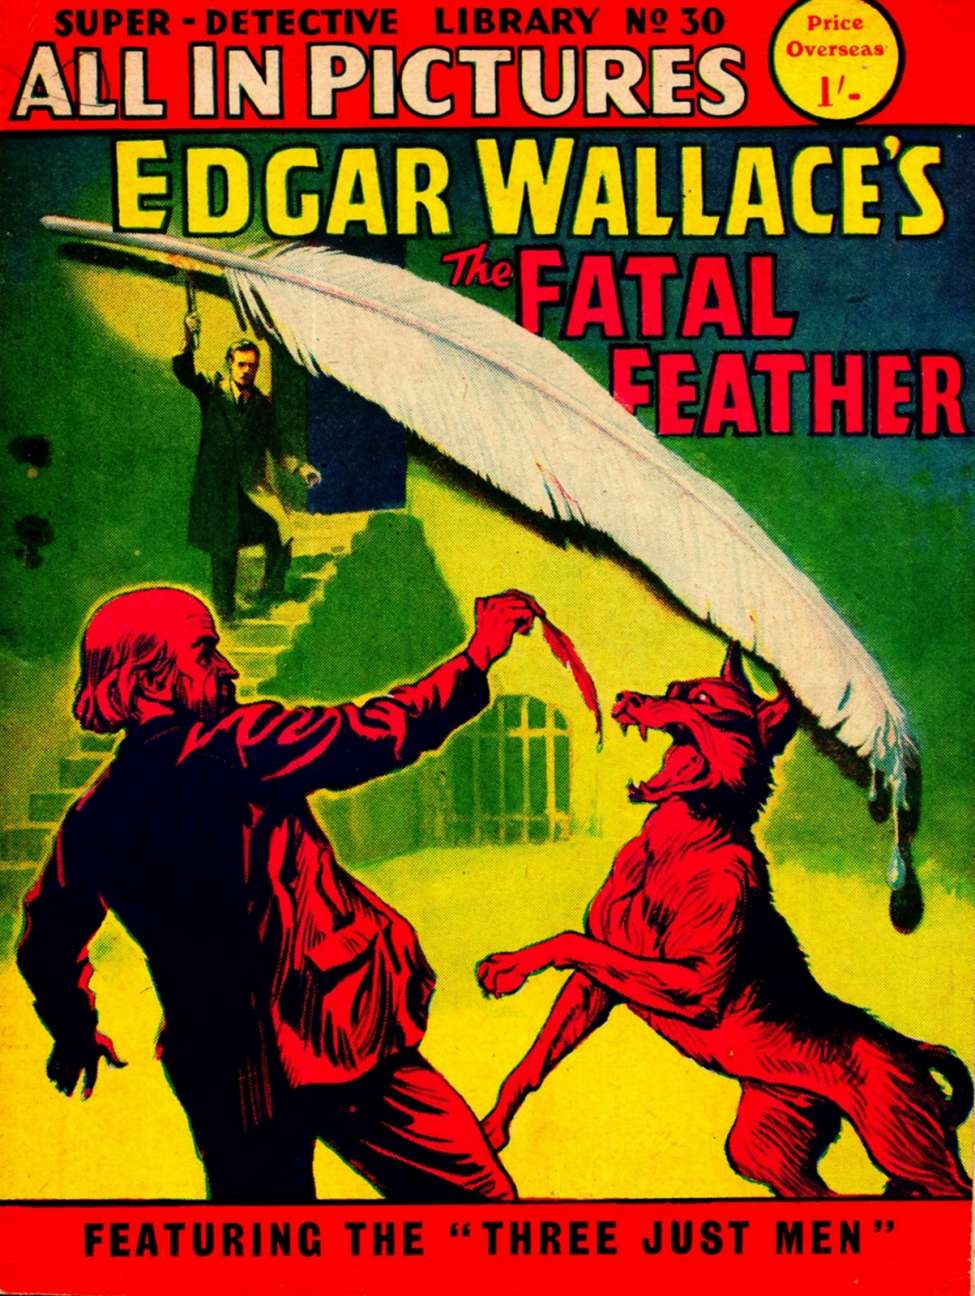 Comic Book Cover For Super Detective Library 30 - Edgar Wallace's The Fatal Feather